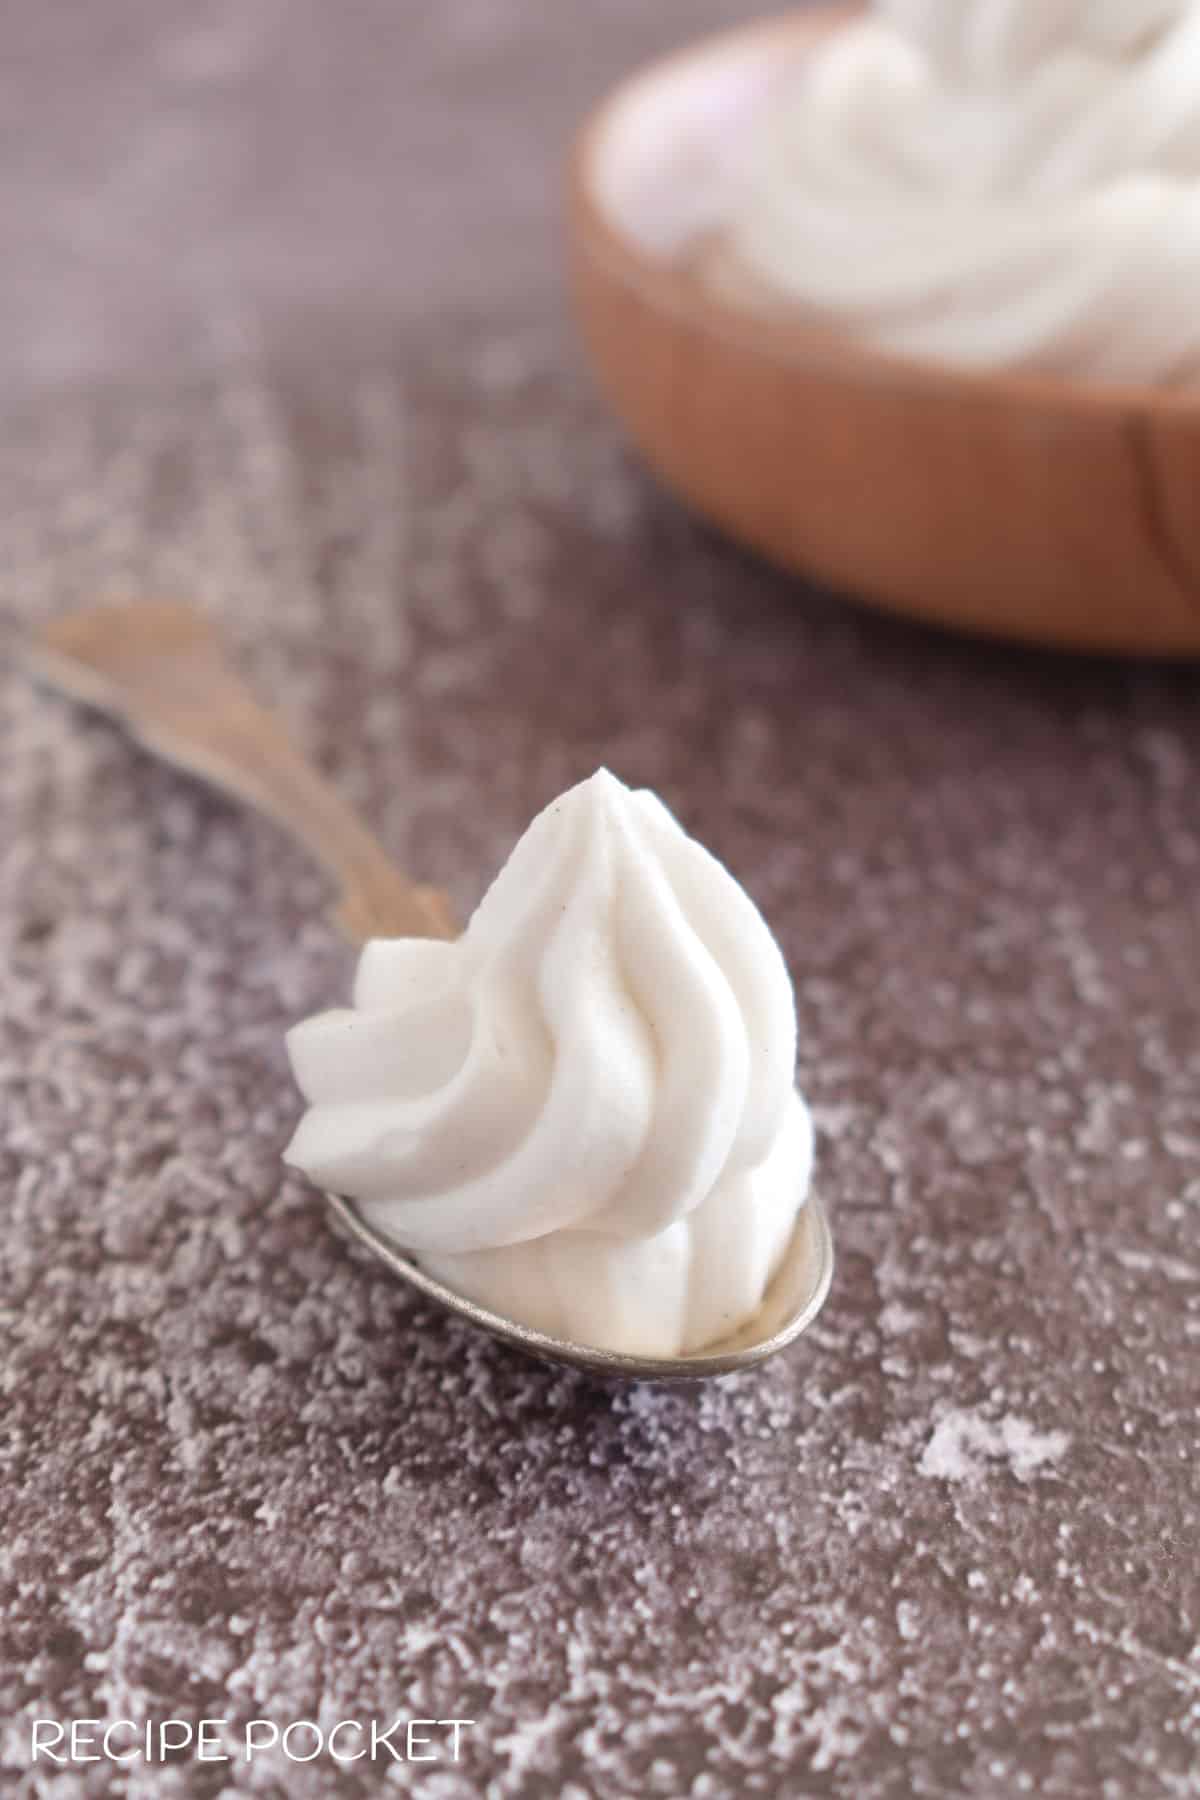 A piped swirl of thick yogurt on spoon.